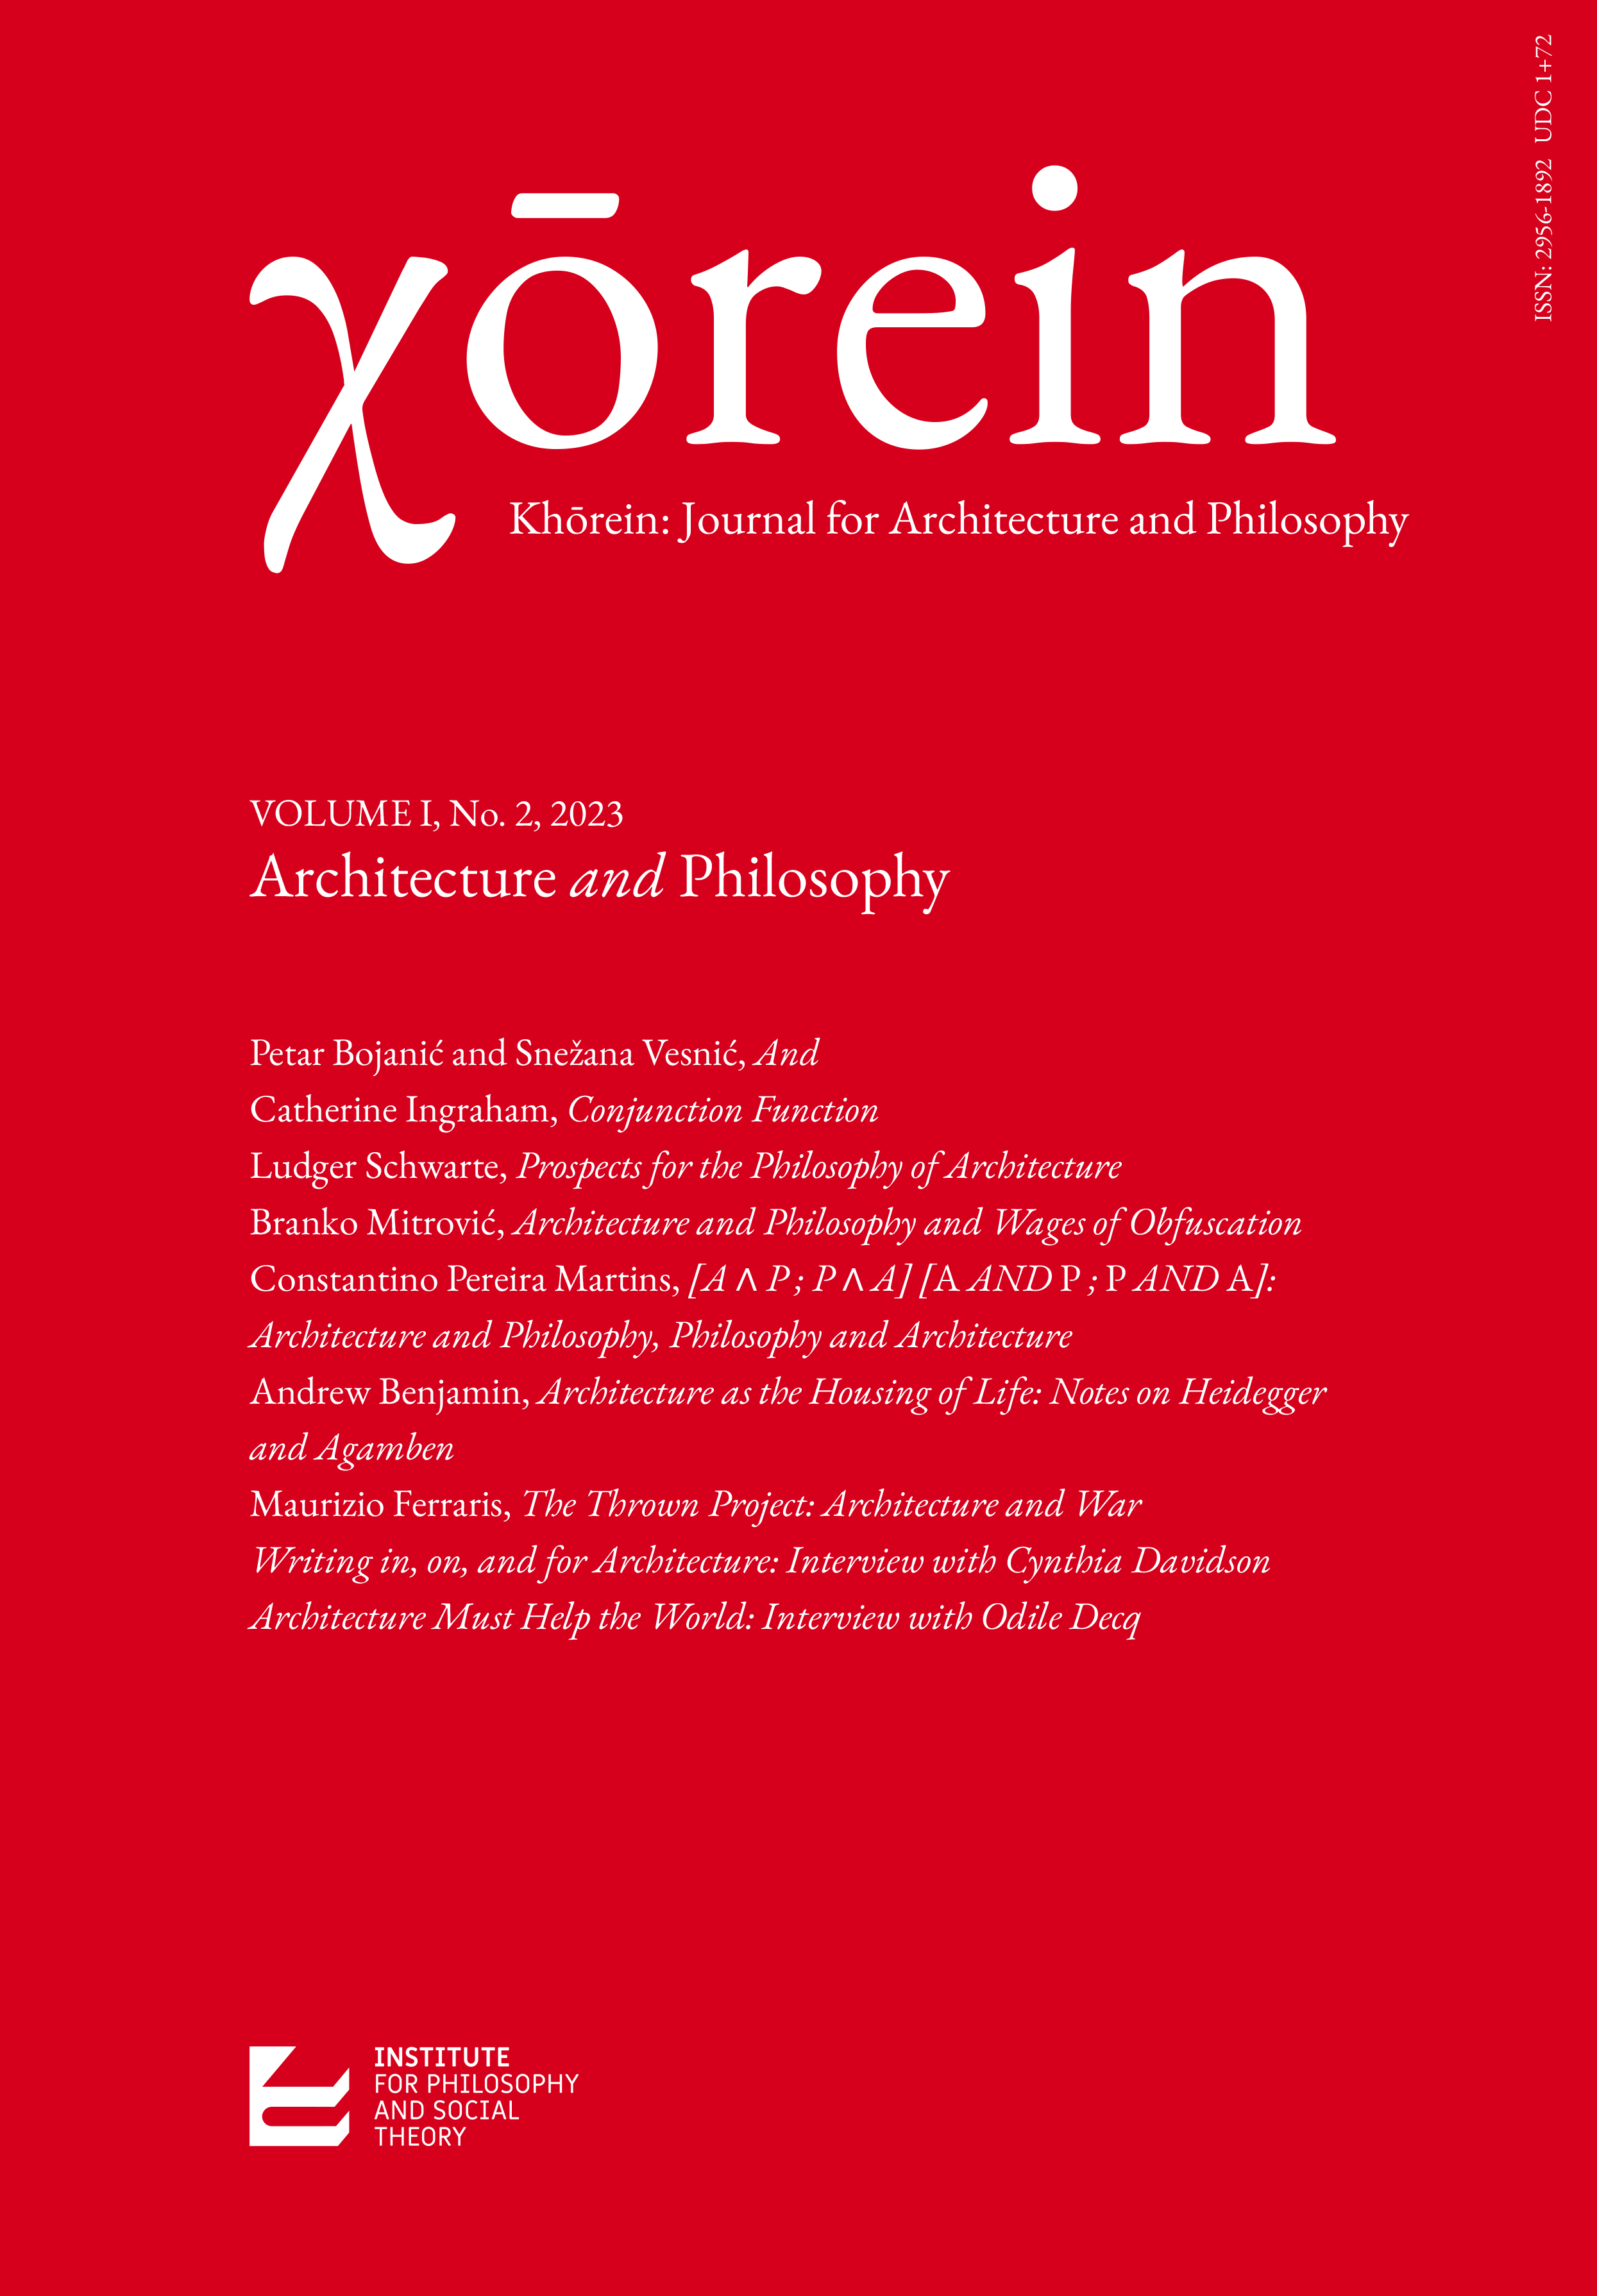 Alessandro Rocca, Totem and Taboo in Architectural Imagination, LetteraVentidue, Siracusa, 2022. Cover Image